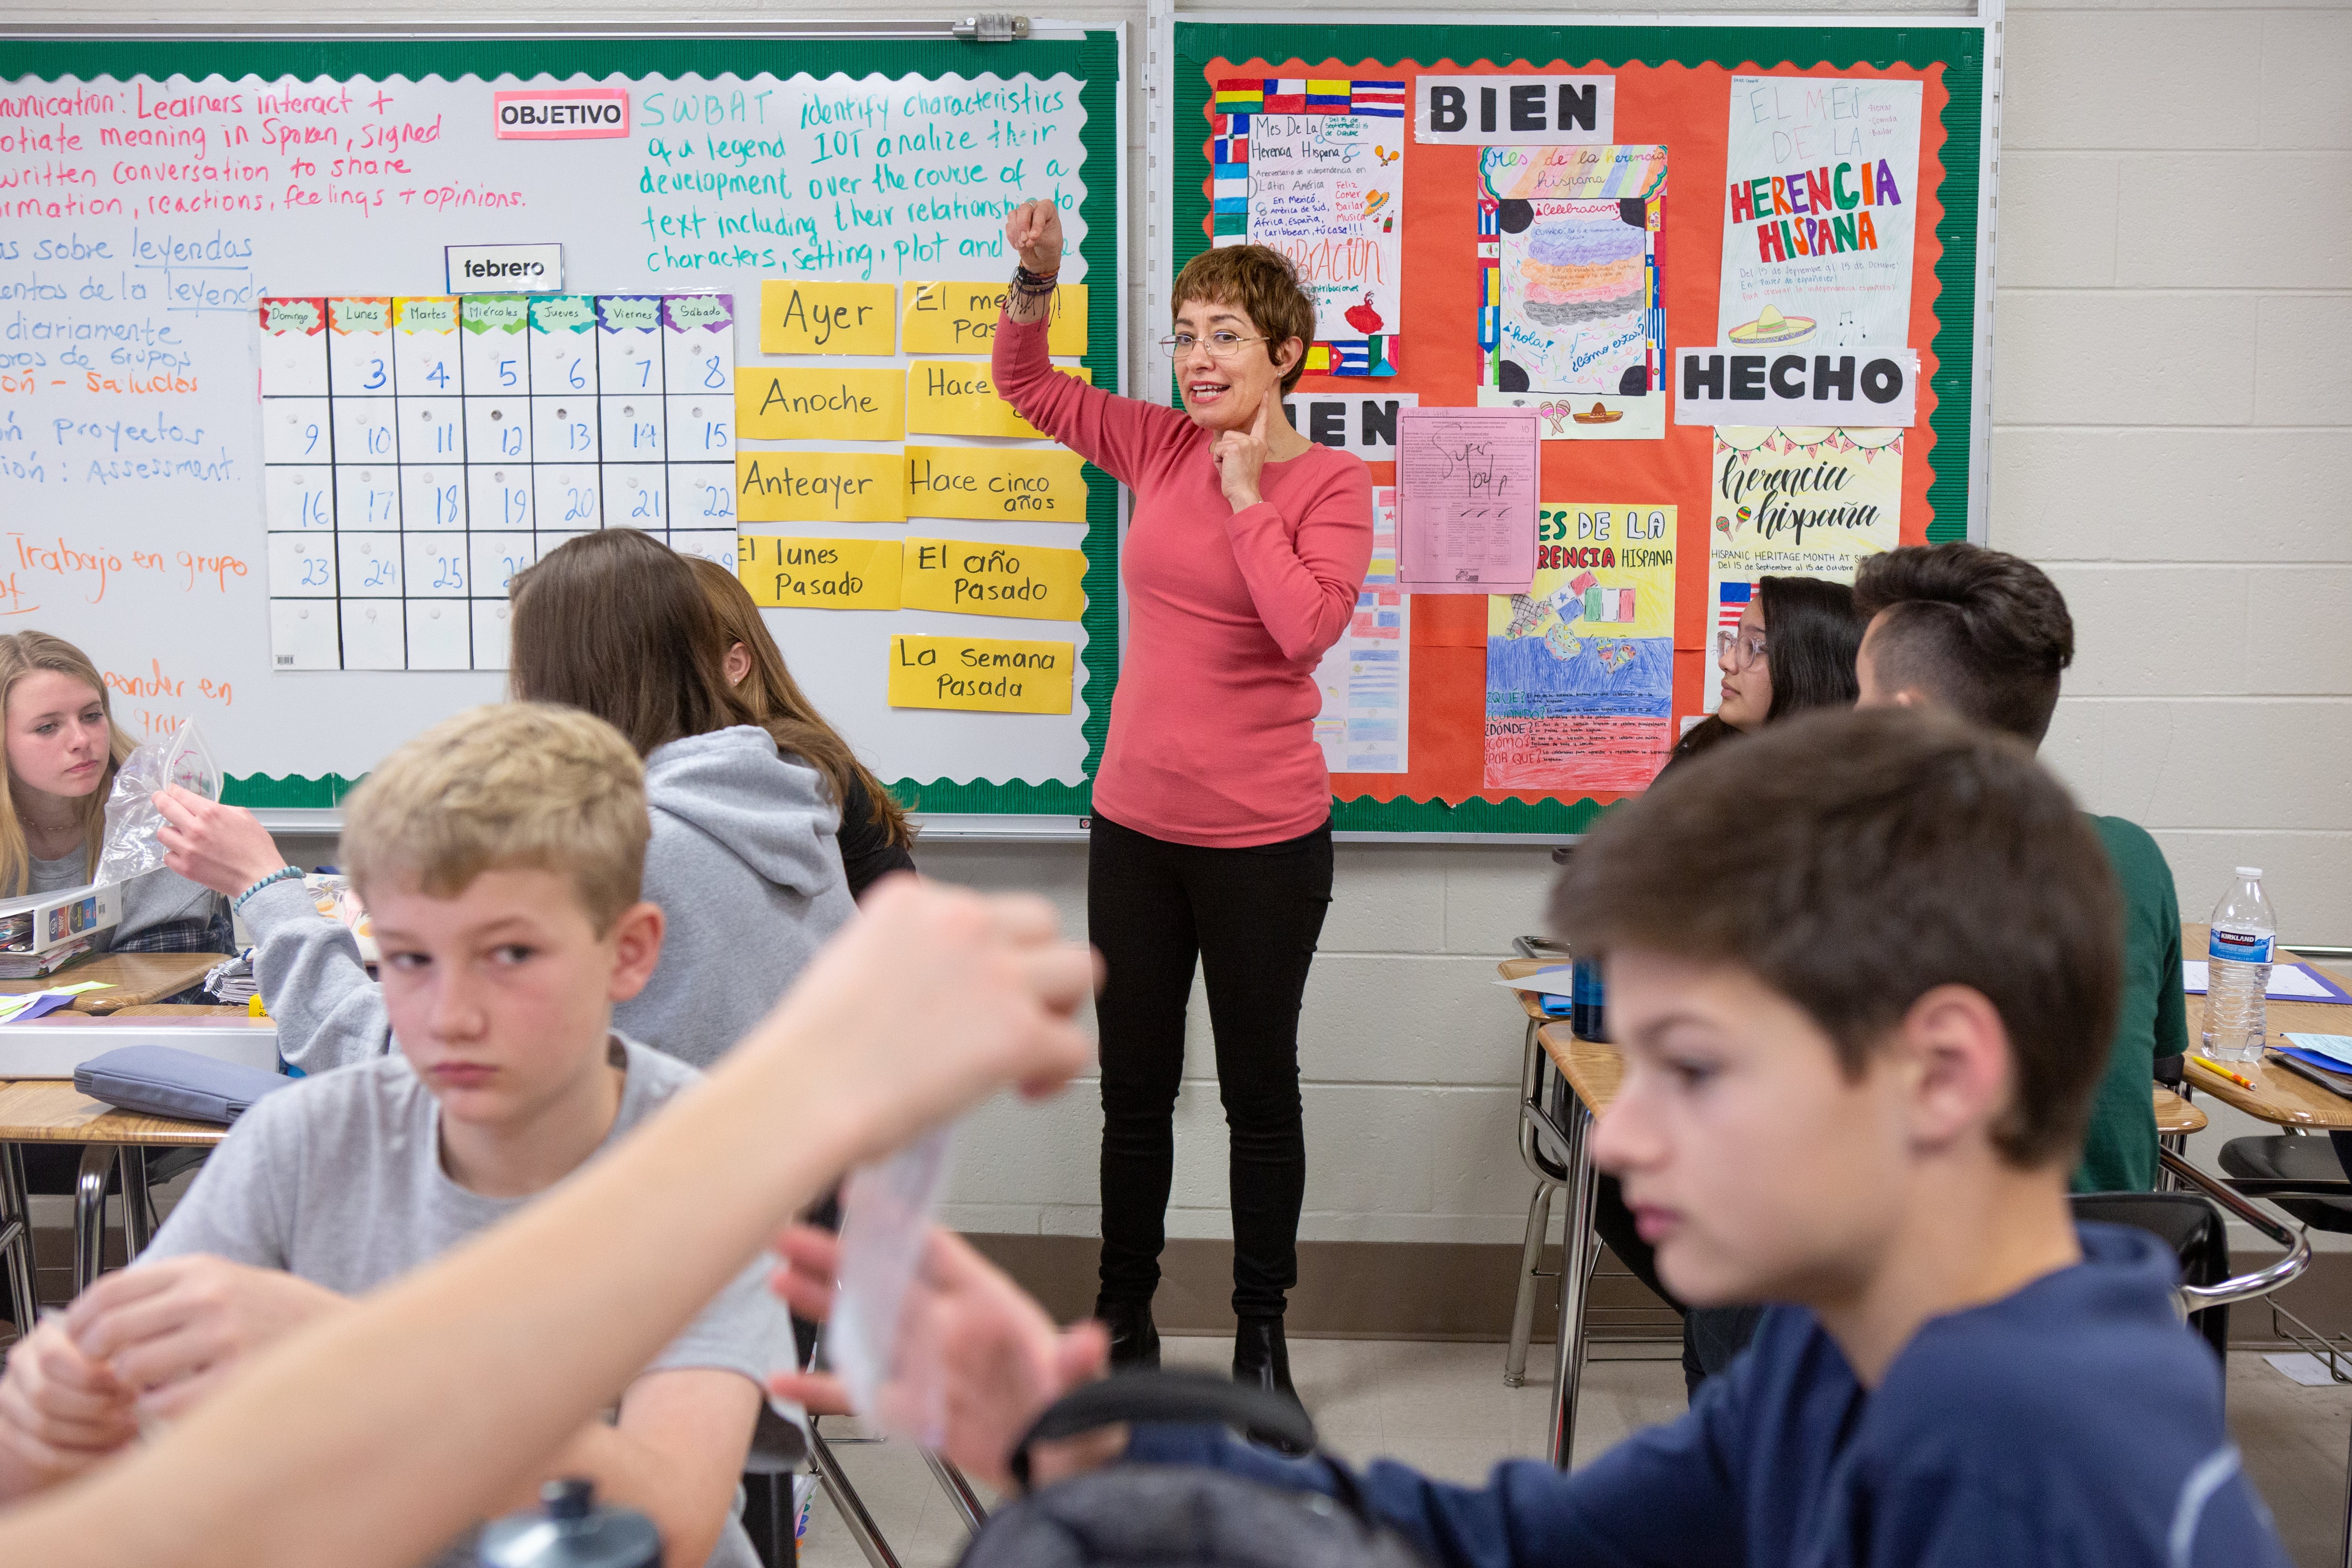 Students sit at desks in a classroom while a teacher provides instruction. A bulletin board behind her is covered with Spanish vocabulary words such as ayer, anoche, bien, and lunes.